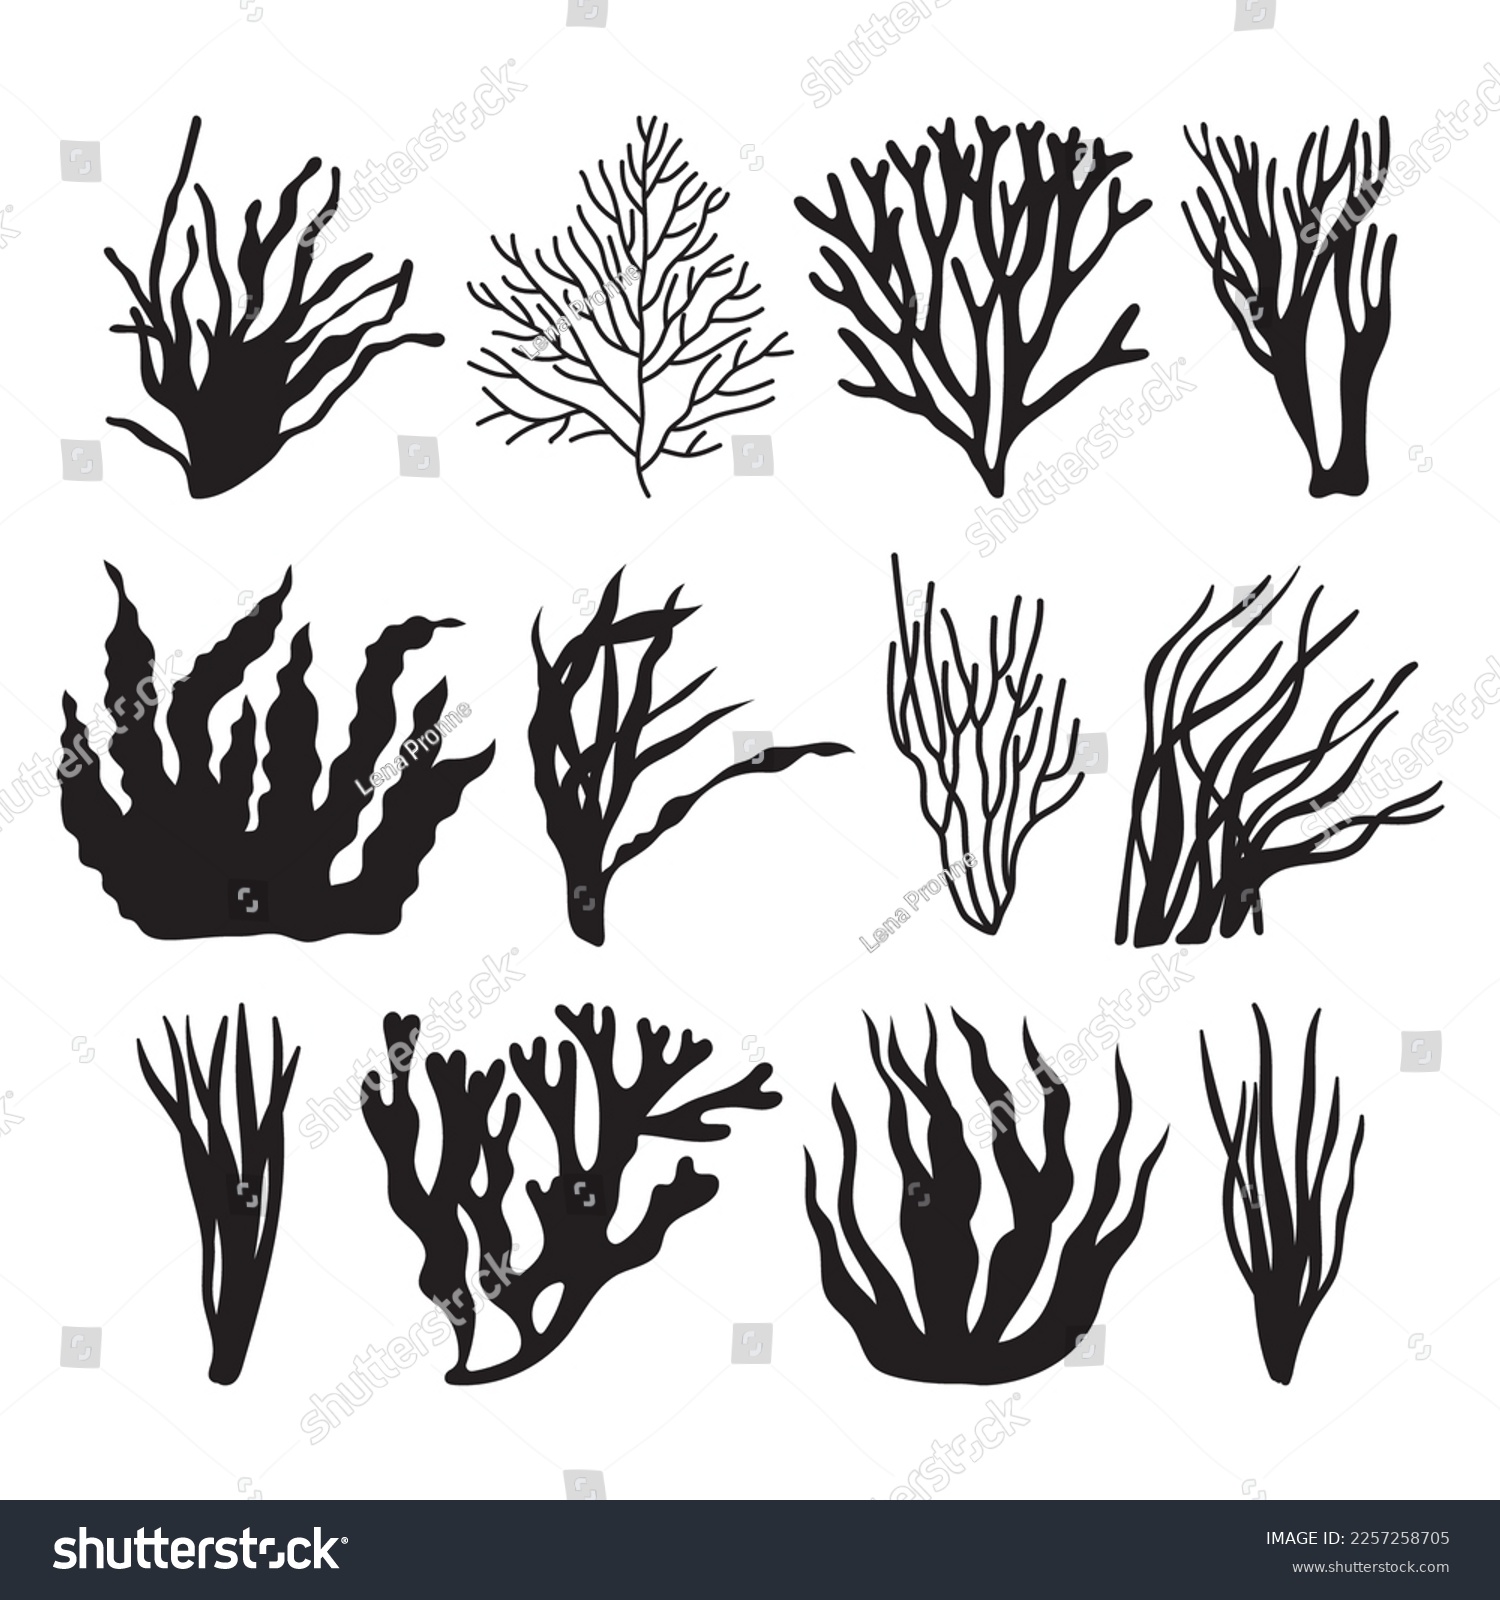 SVG of Seaweed illustrated silhouette, stencil templates set, objects for printing sublimation svg